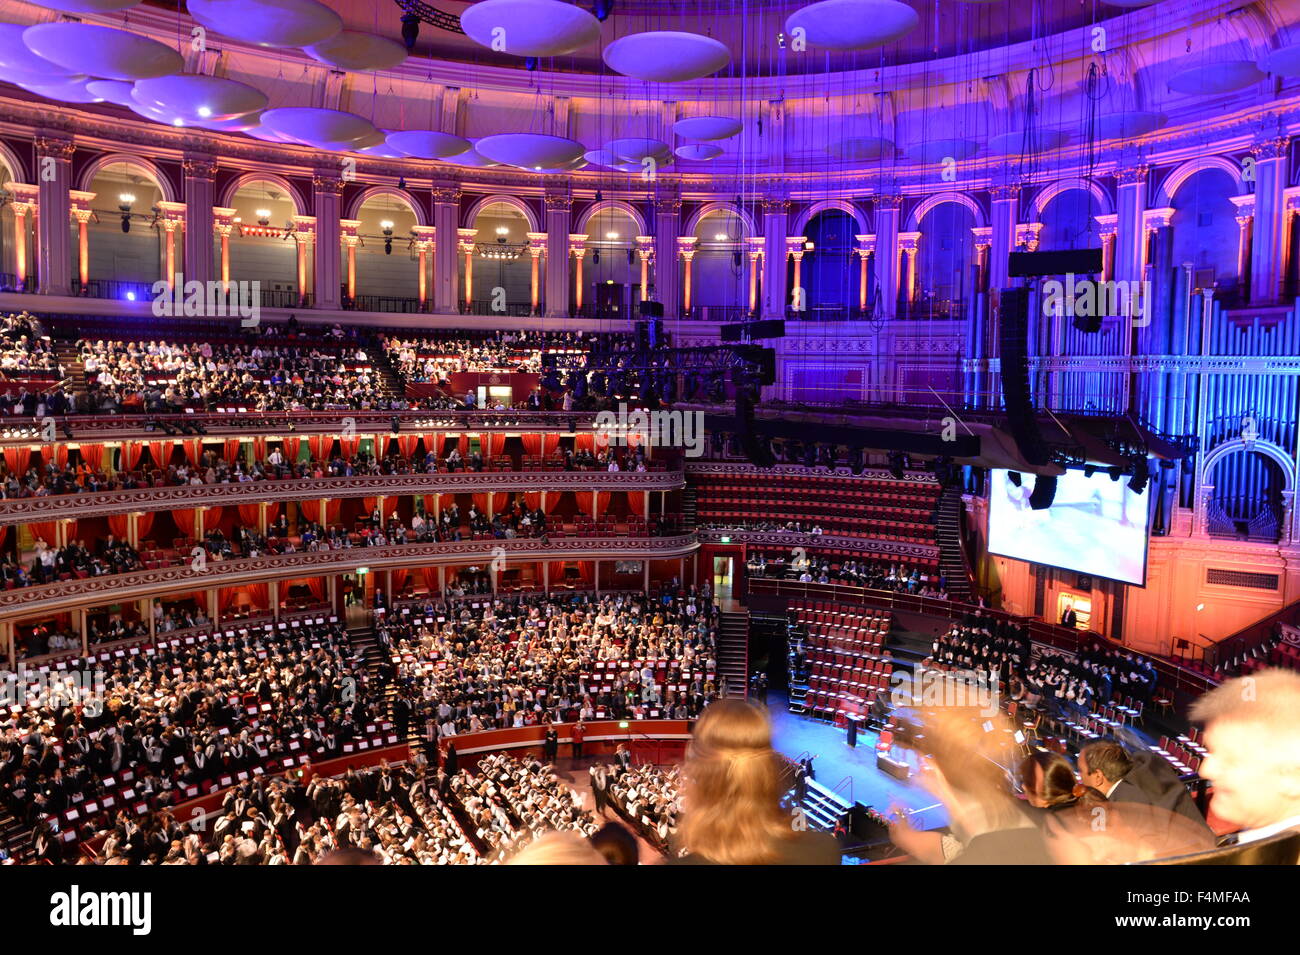 Inside the Royal Albert Hall graduates and families on Imperial College London Commemoration day Stock Photo